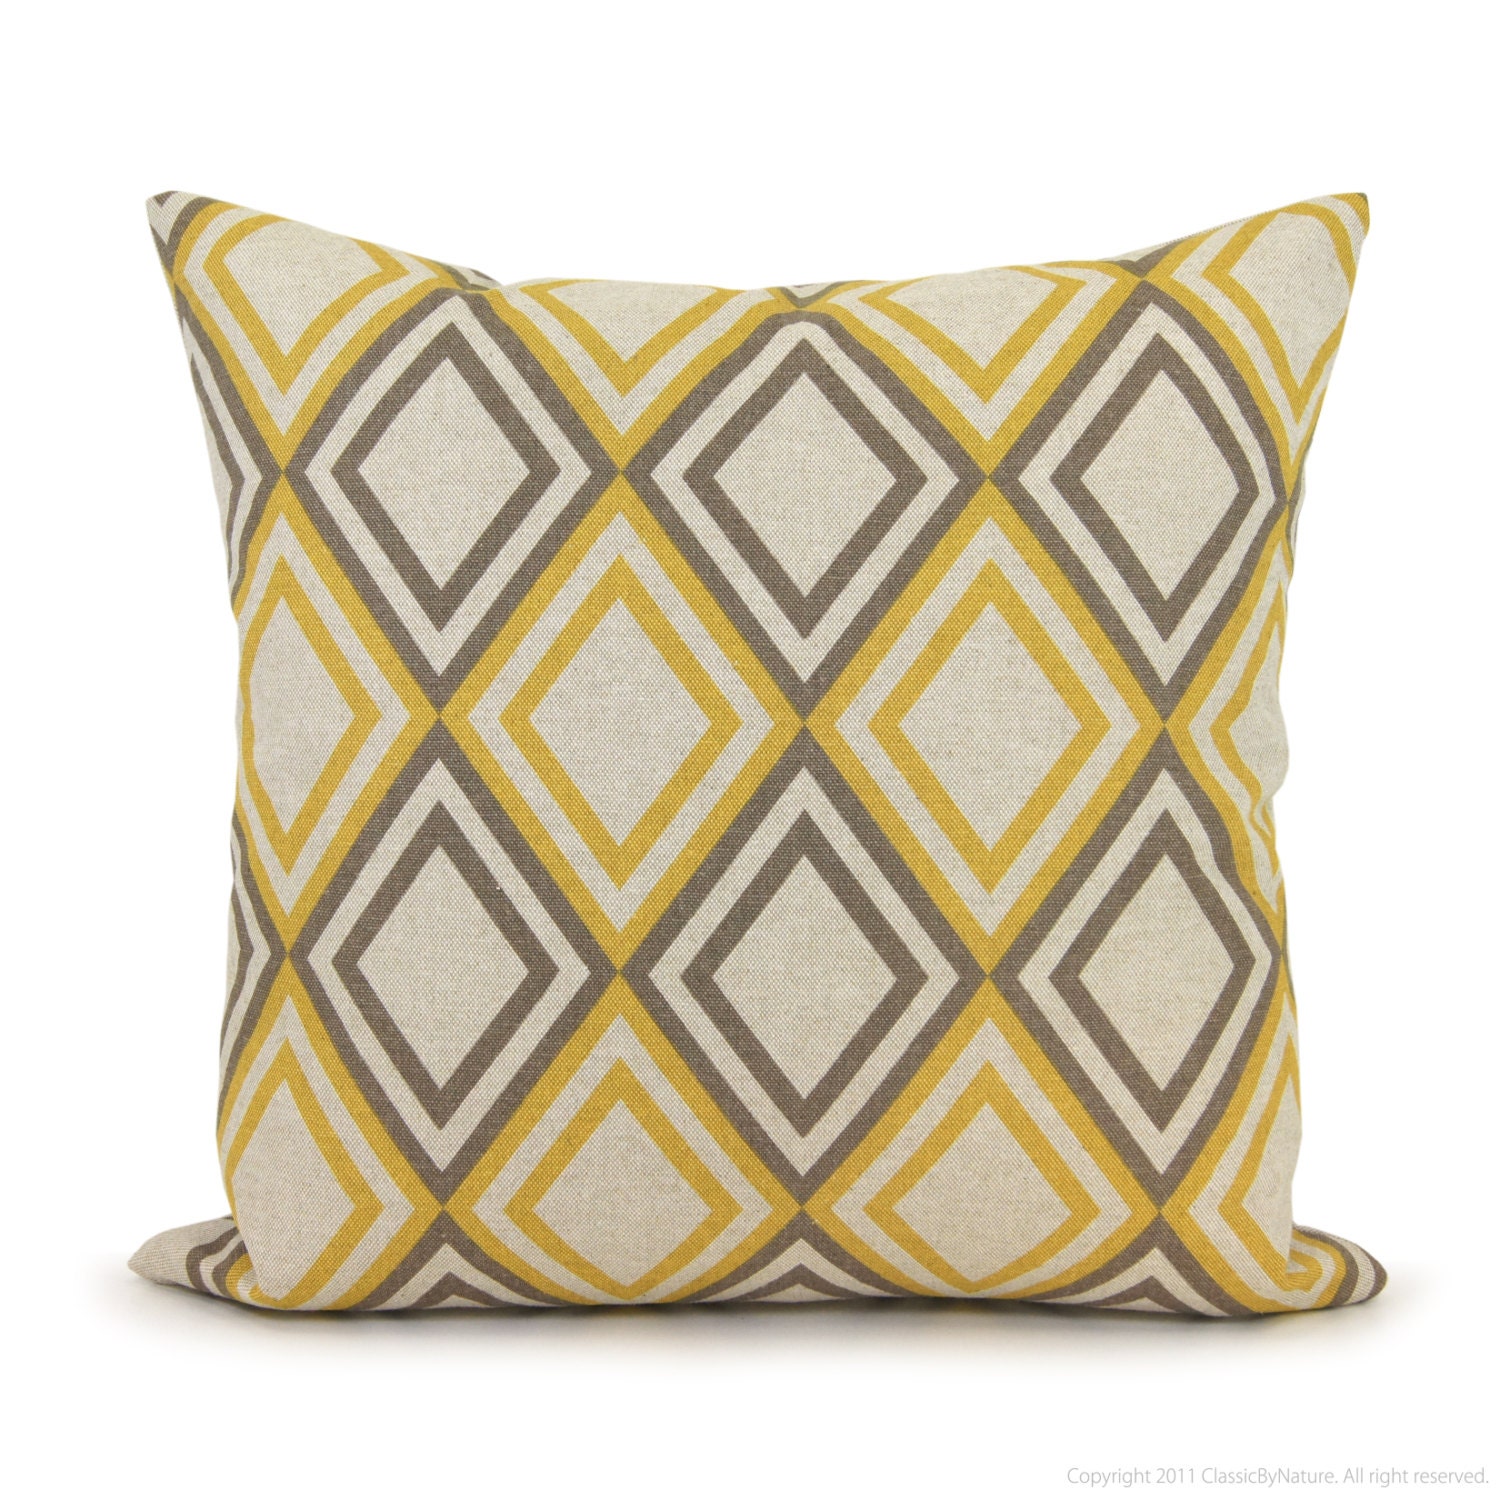 Geometric pillow cover - 18x18 pillow cover - Gray and yellow decorative pillow cover - Modern 18x18 throw pillow cover - ClassicByNature